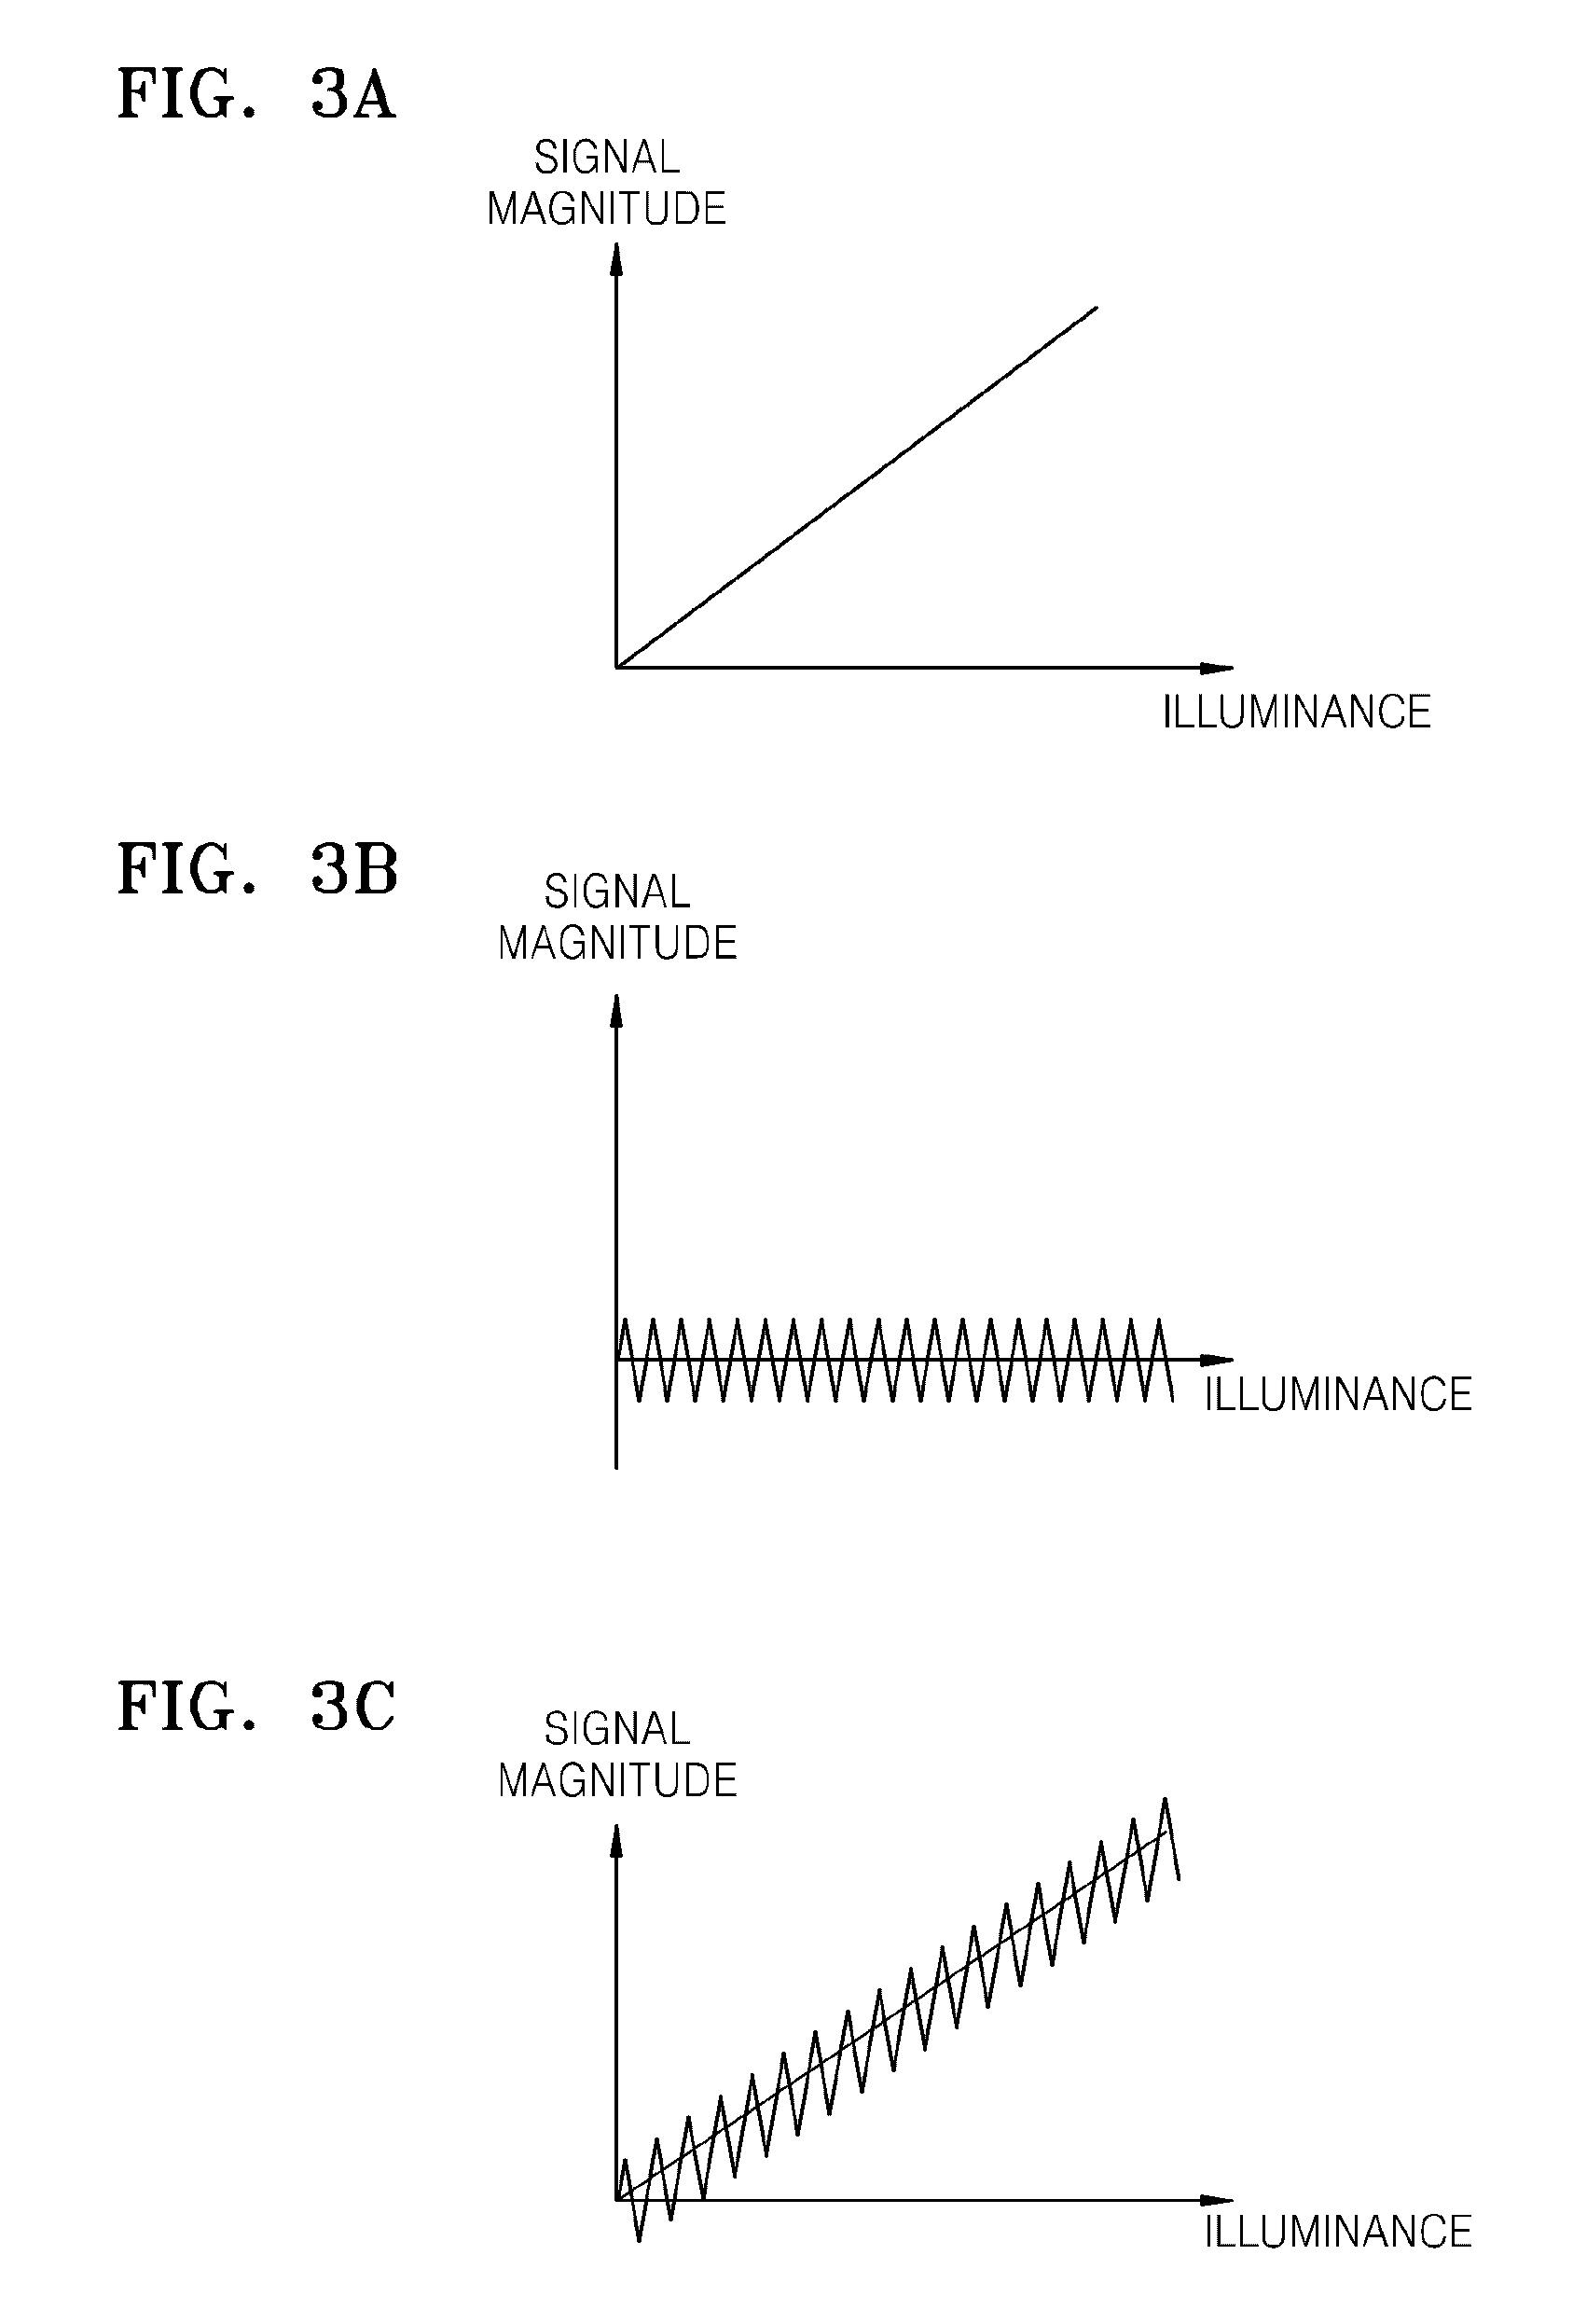 Method and apparatus for compensating signal distortion caused by noise